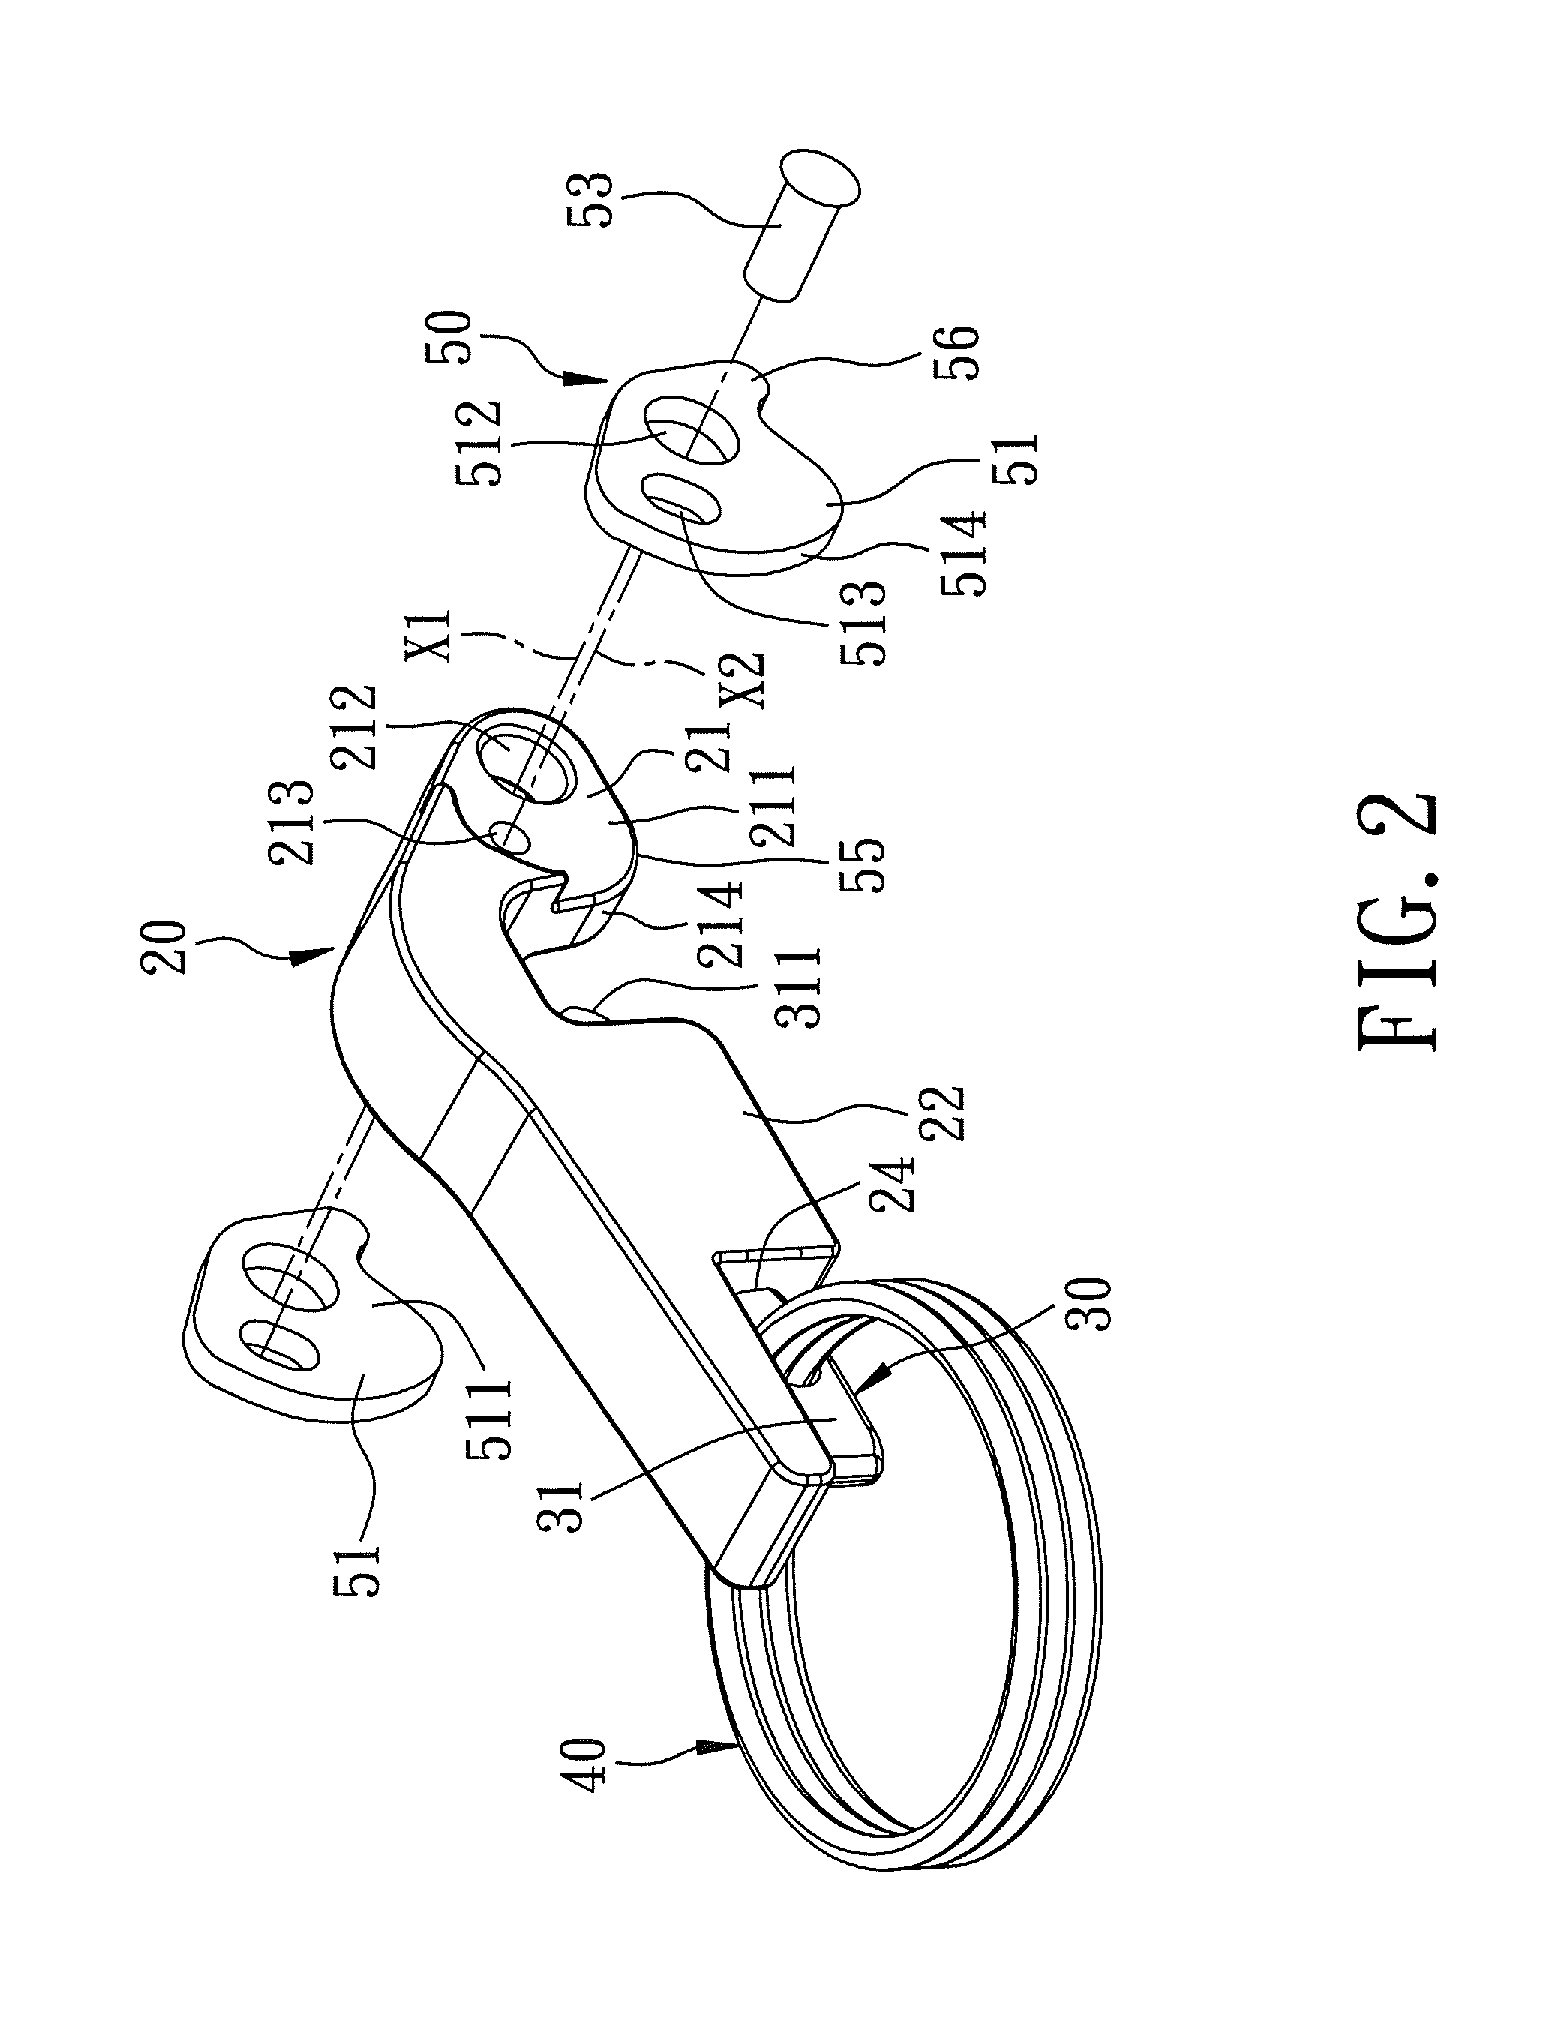 Cam-lock actuating device for use in a locking coupling assembly that couples two tubular members